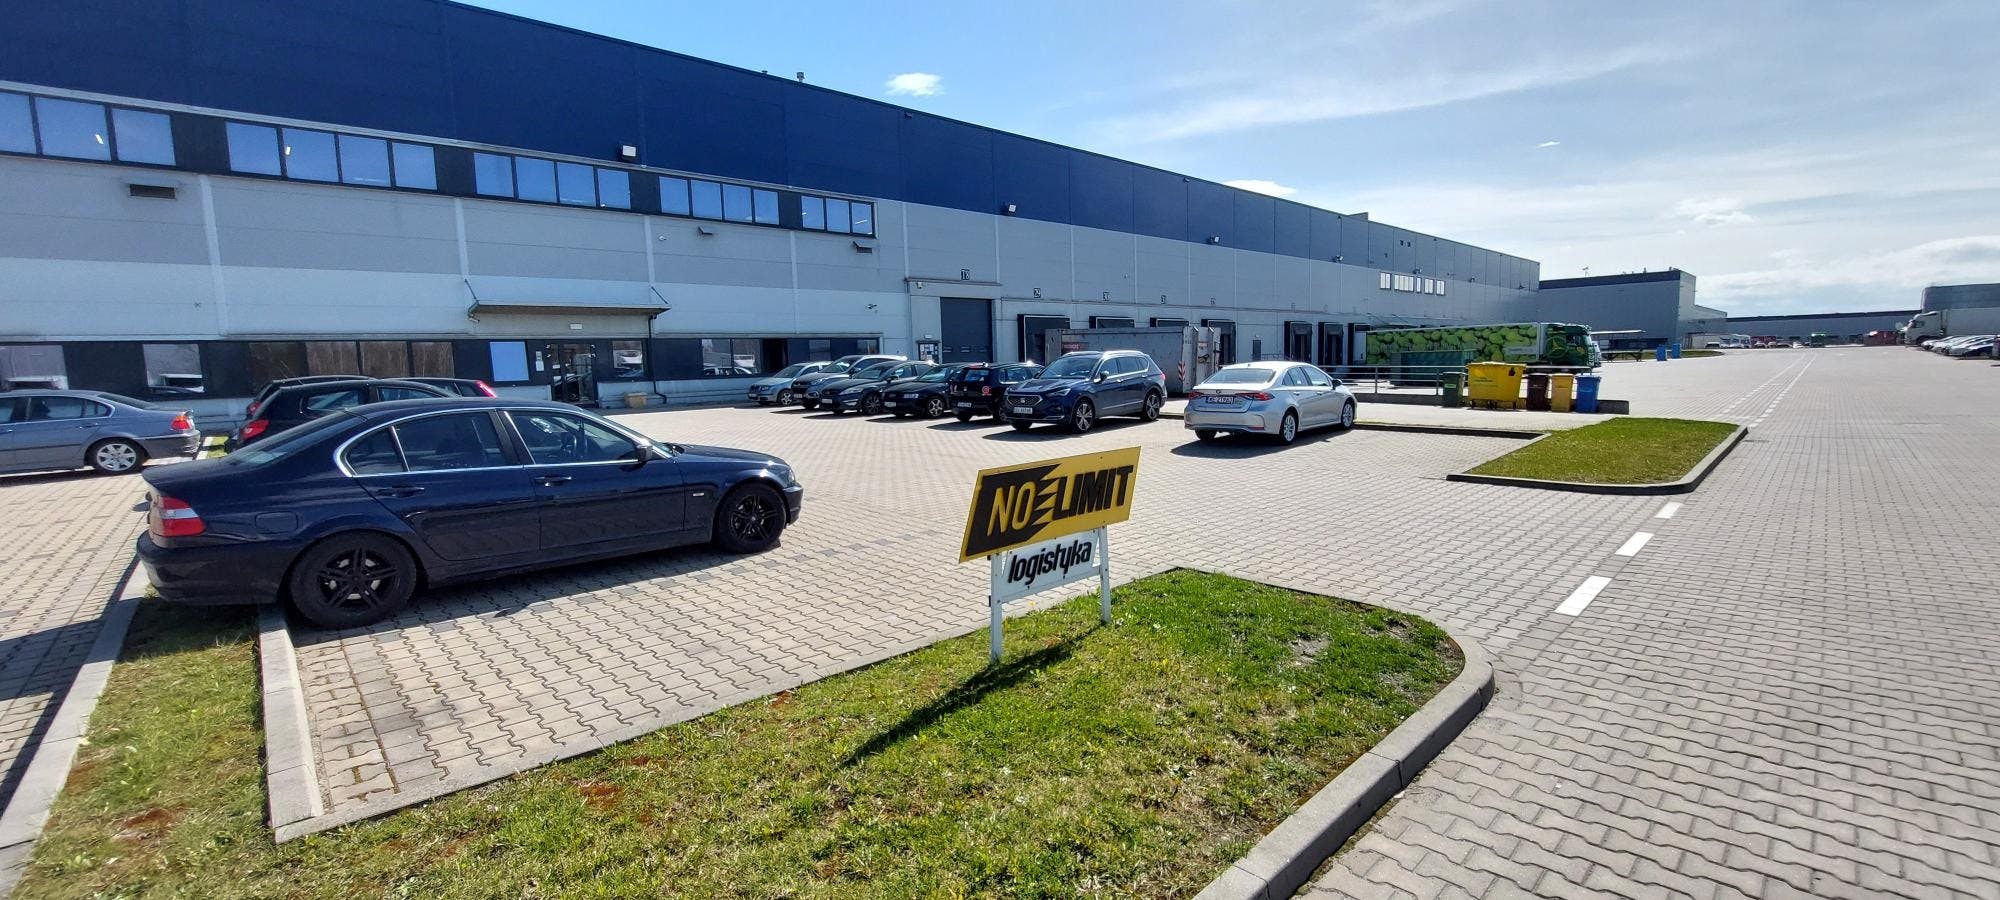 Warehouses for rent in Warehouses Budynek magazynowy Sosnowiec #1